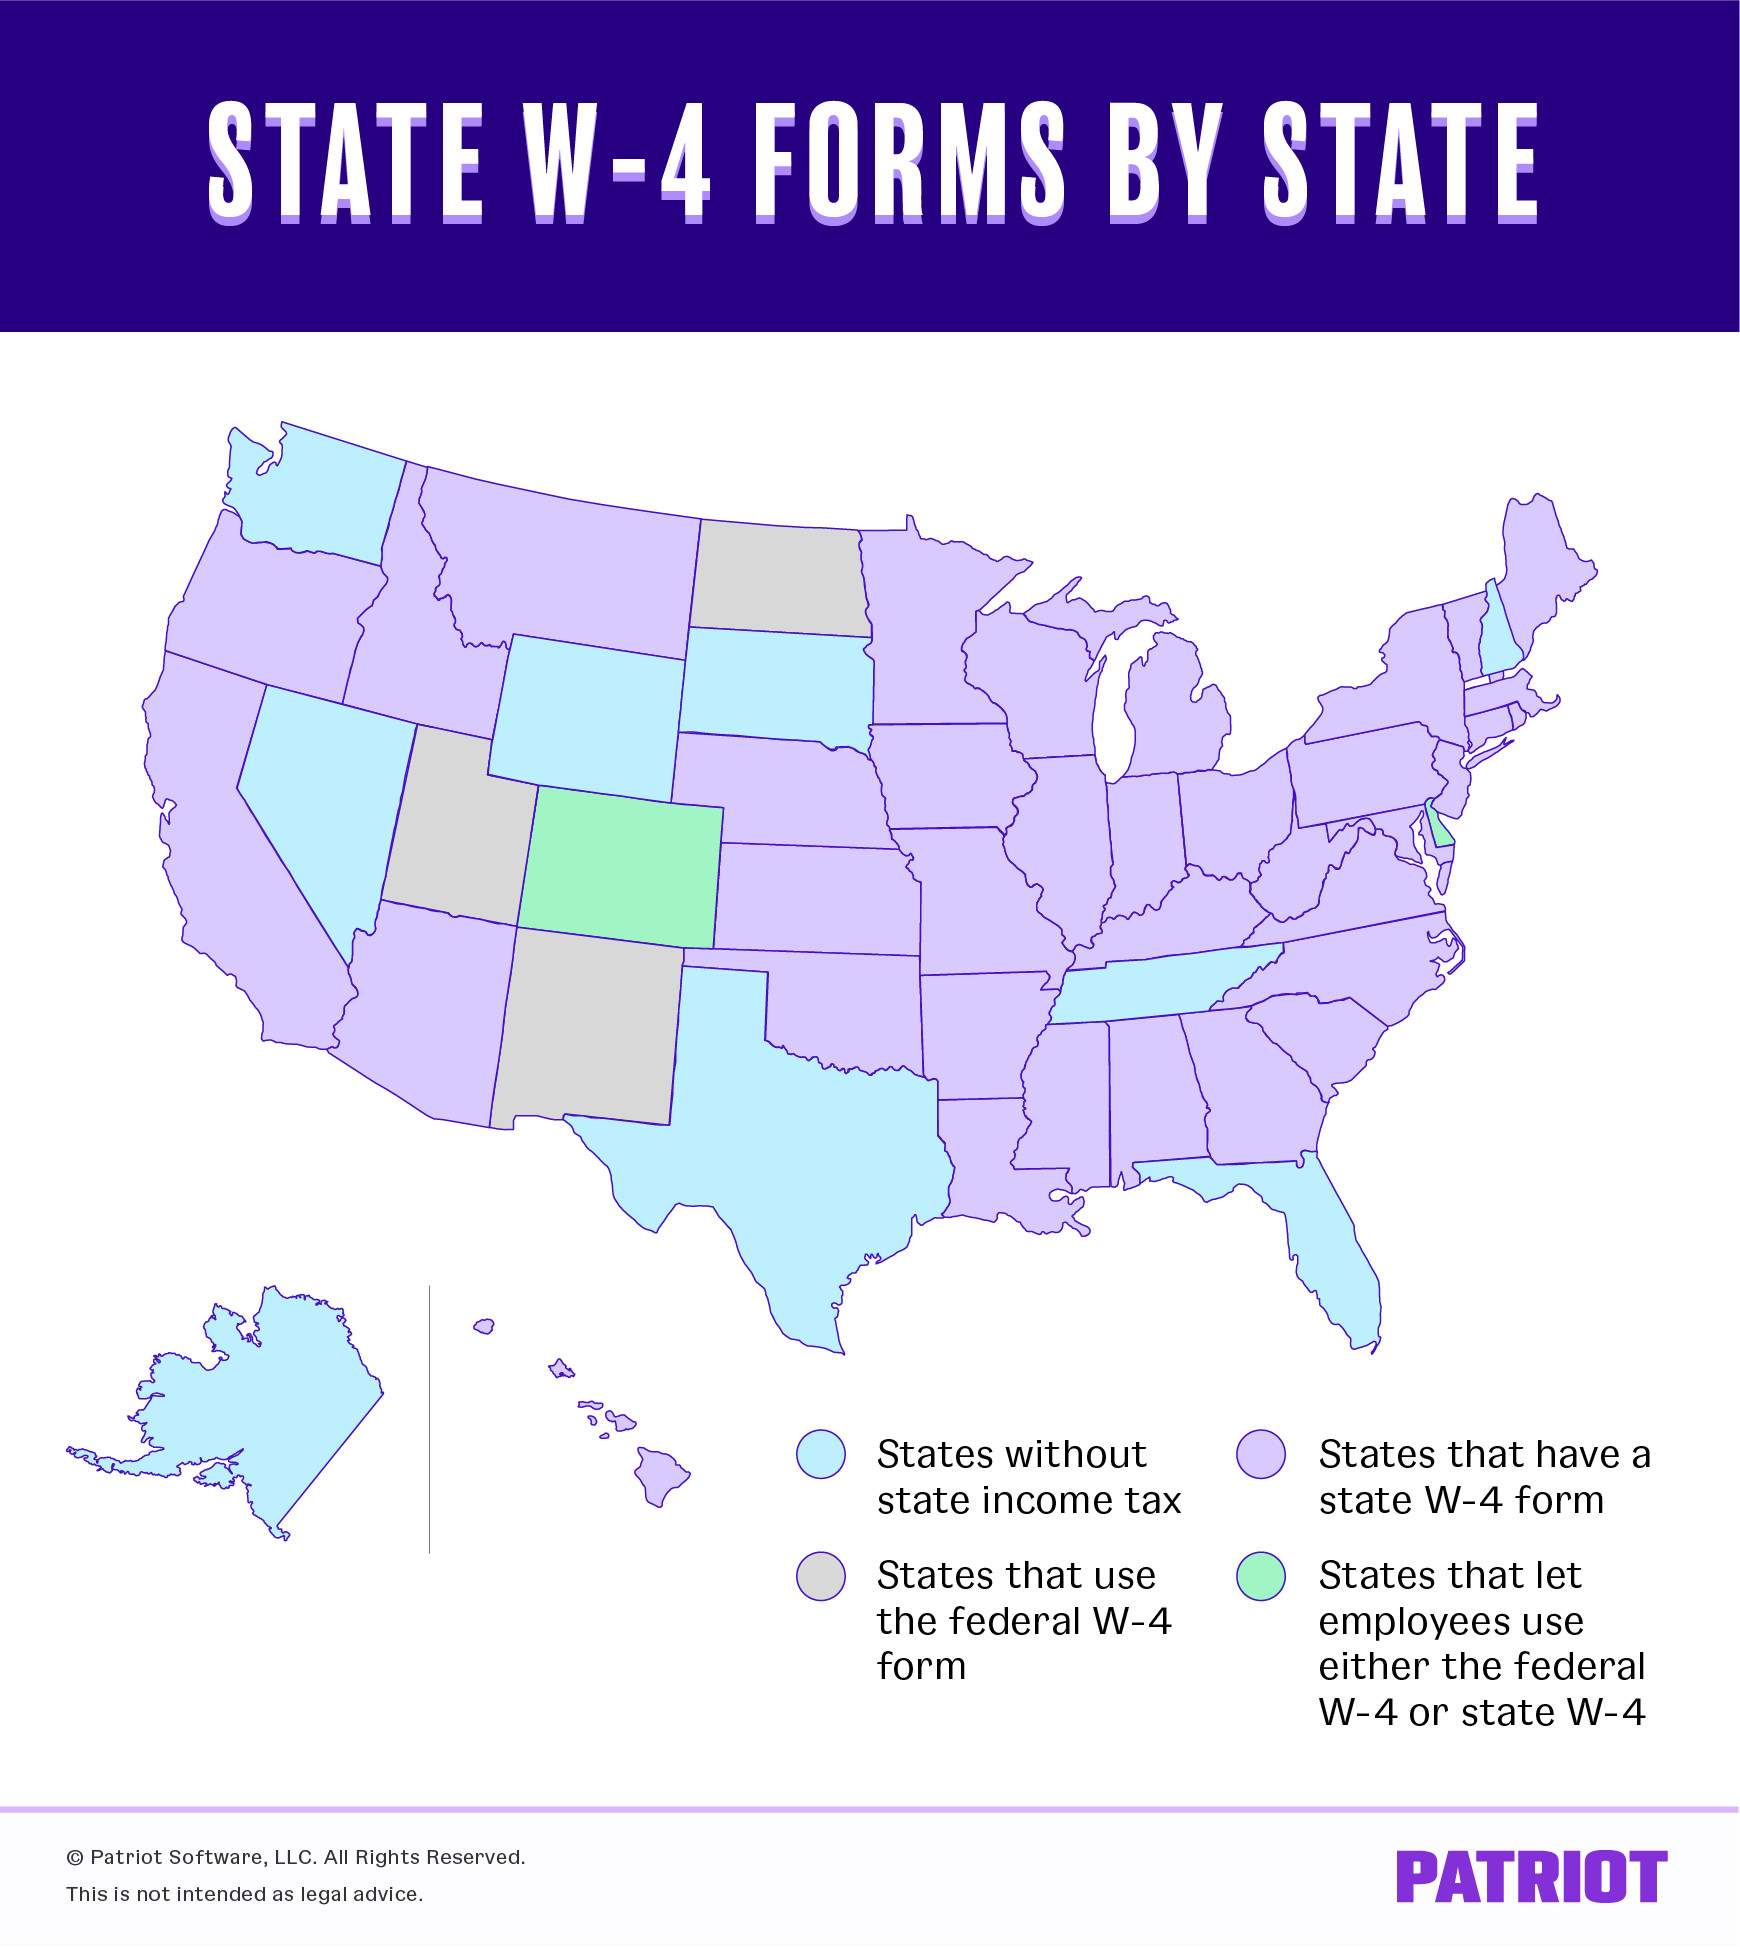 U.S. map showing states without state income tax, states that use the federal W-4 form, states that have a state W-4 form, and states that let employees use either the federal or state W-4 form